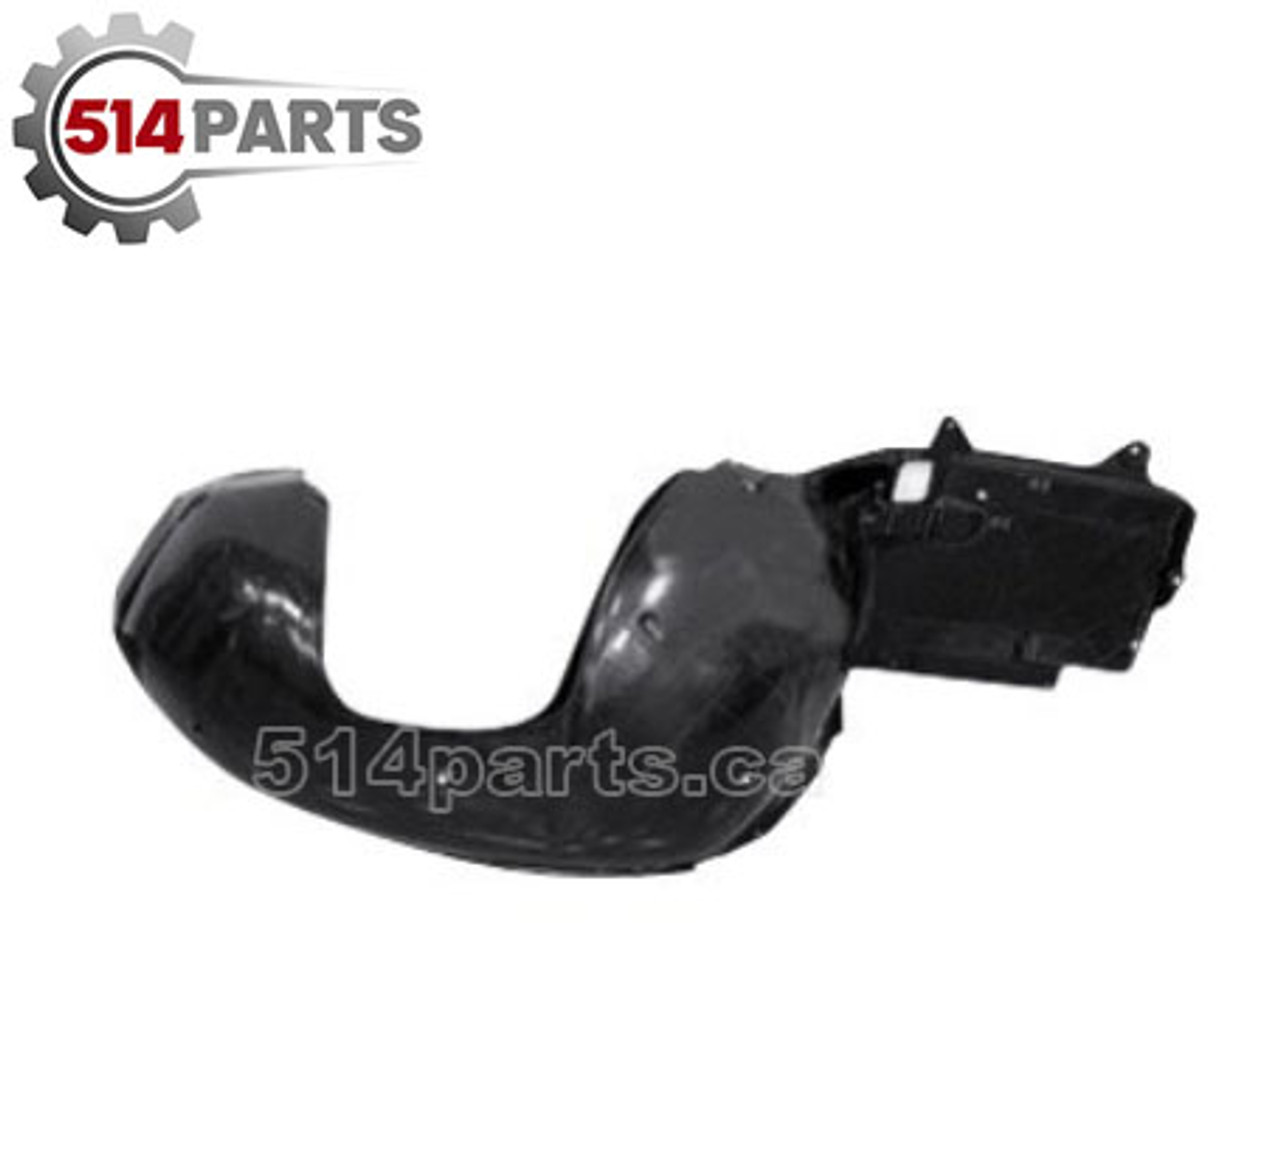 2000 - 2006 BMW 3 SERIES COUPE/ CONVERTIBLE FENDER LINER REAR SECTION - FAUSSE AILE